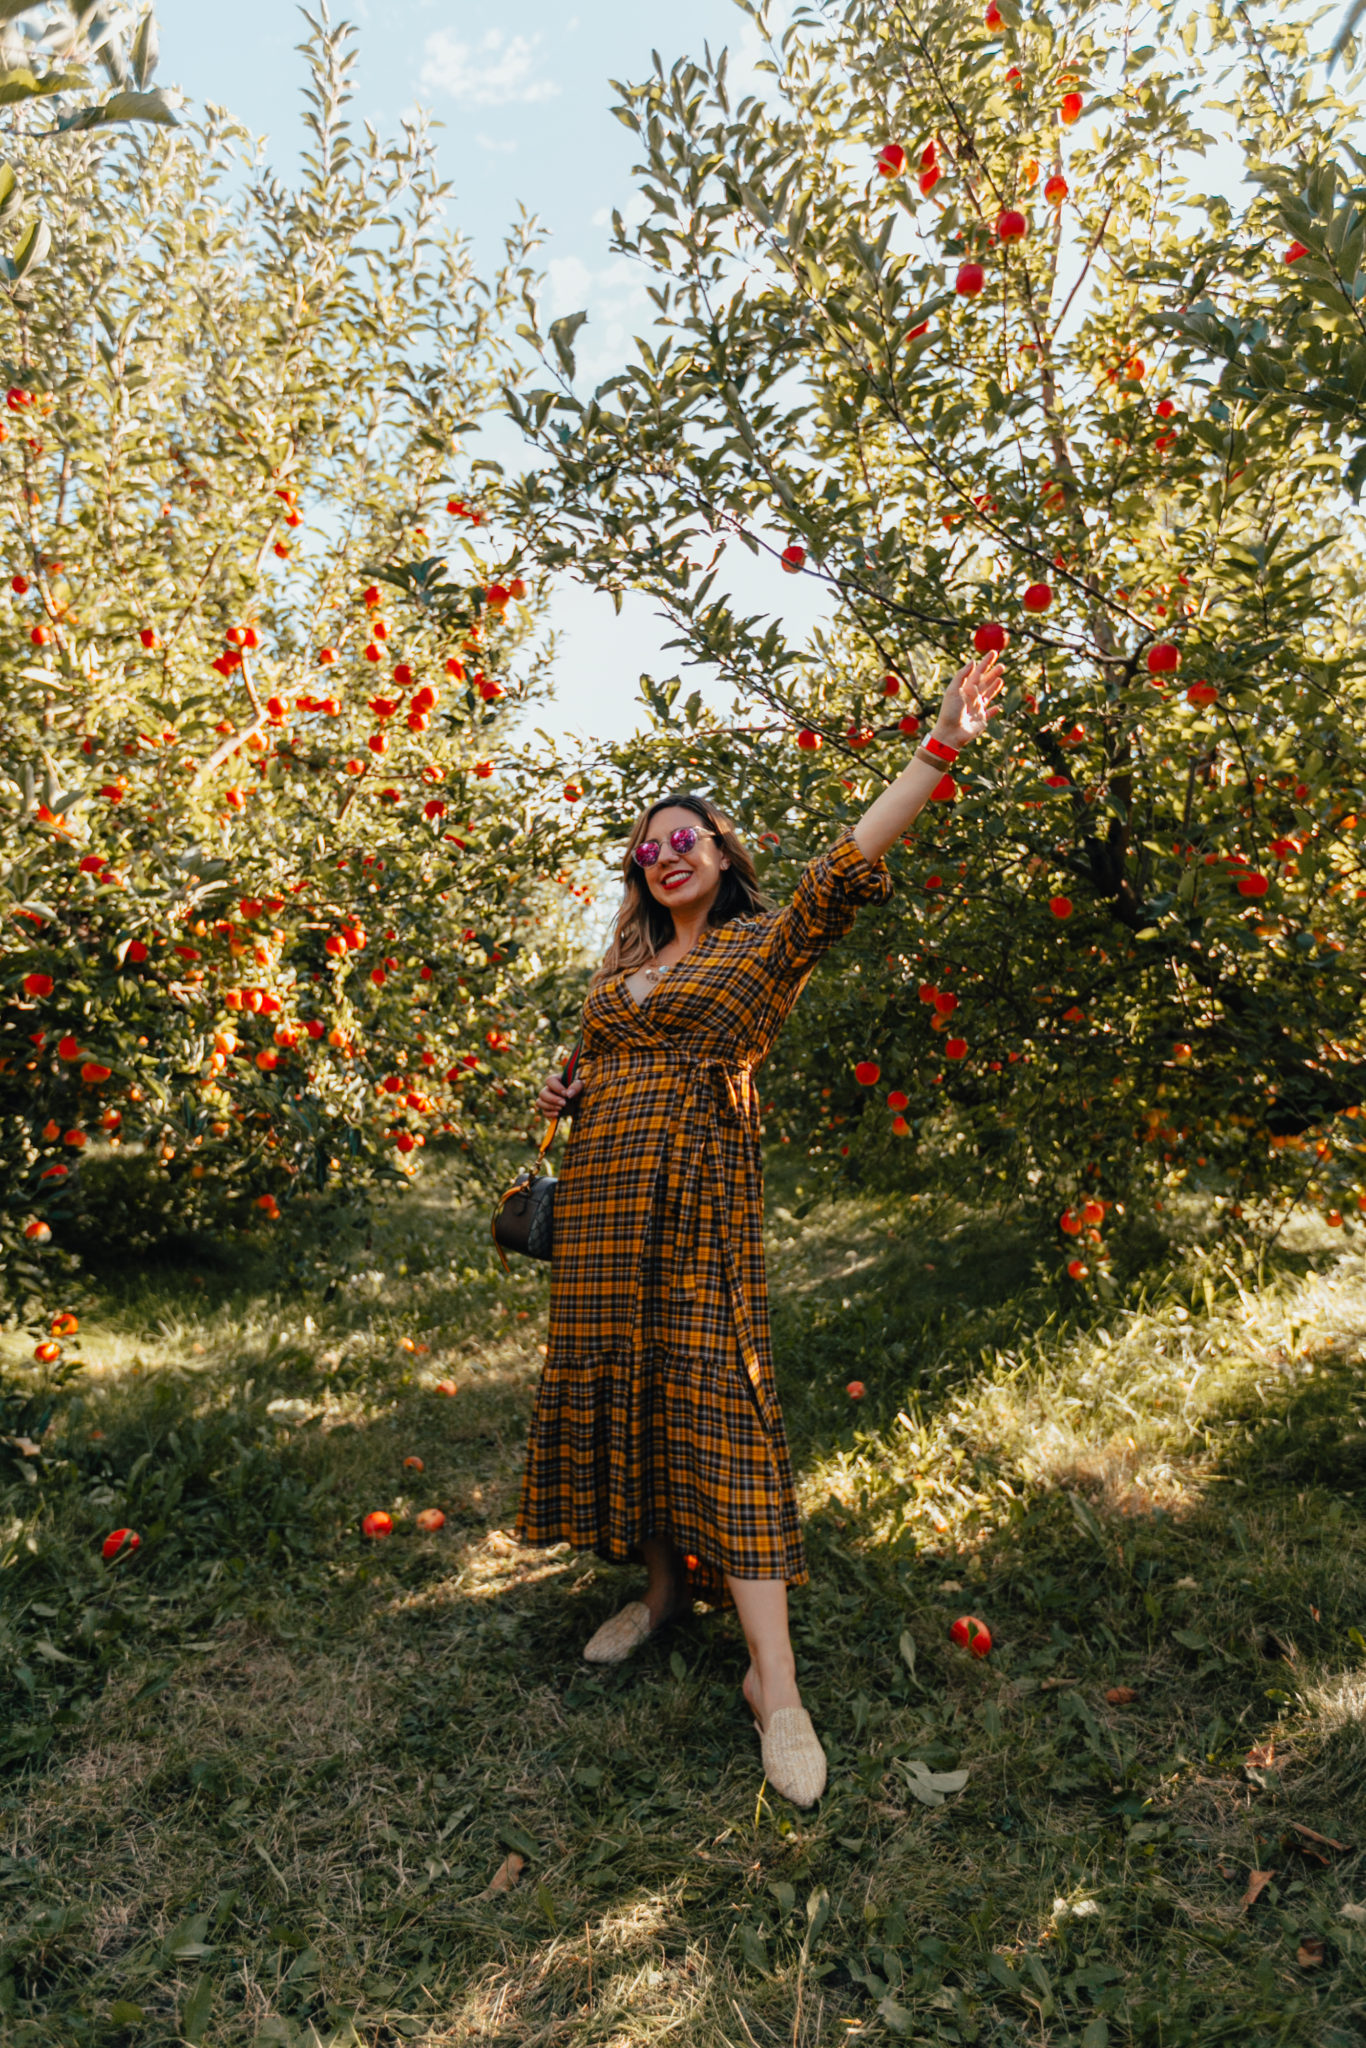 County Line Apple Orchard & On Mondays We Link Up (#135) by popular Chicago blog, Glass of Glam: image of a woman at the County Line Apple Orchard and wearing an Anthropologie Dalton Wrap Maxi Dress, Grande Cosmetics GrandeLIPS Plumping Liquid Lipstick, Semi-Matte, Warby Parker Haskell sunglasses, Steve Madden Mattis Textured Mules, and Gucci GG Supreme messenger bag.